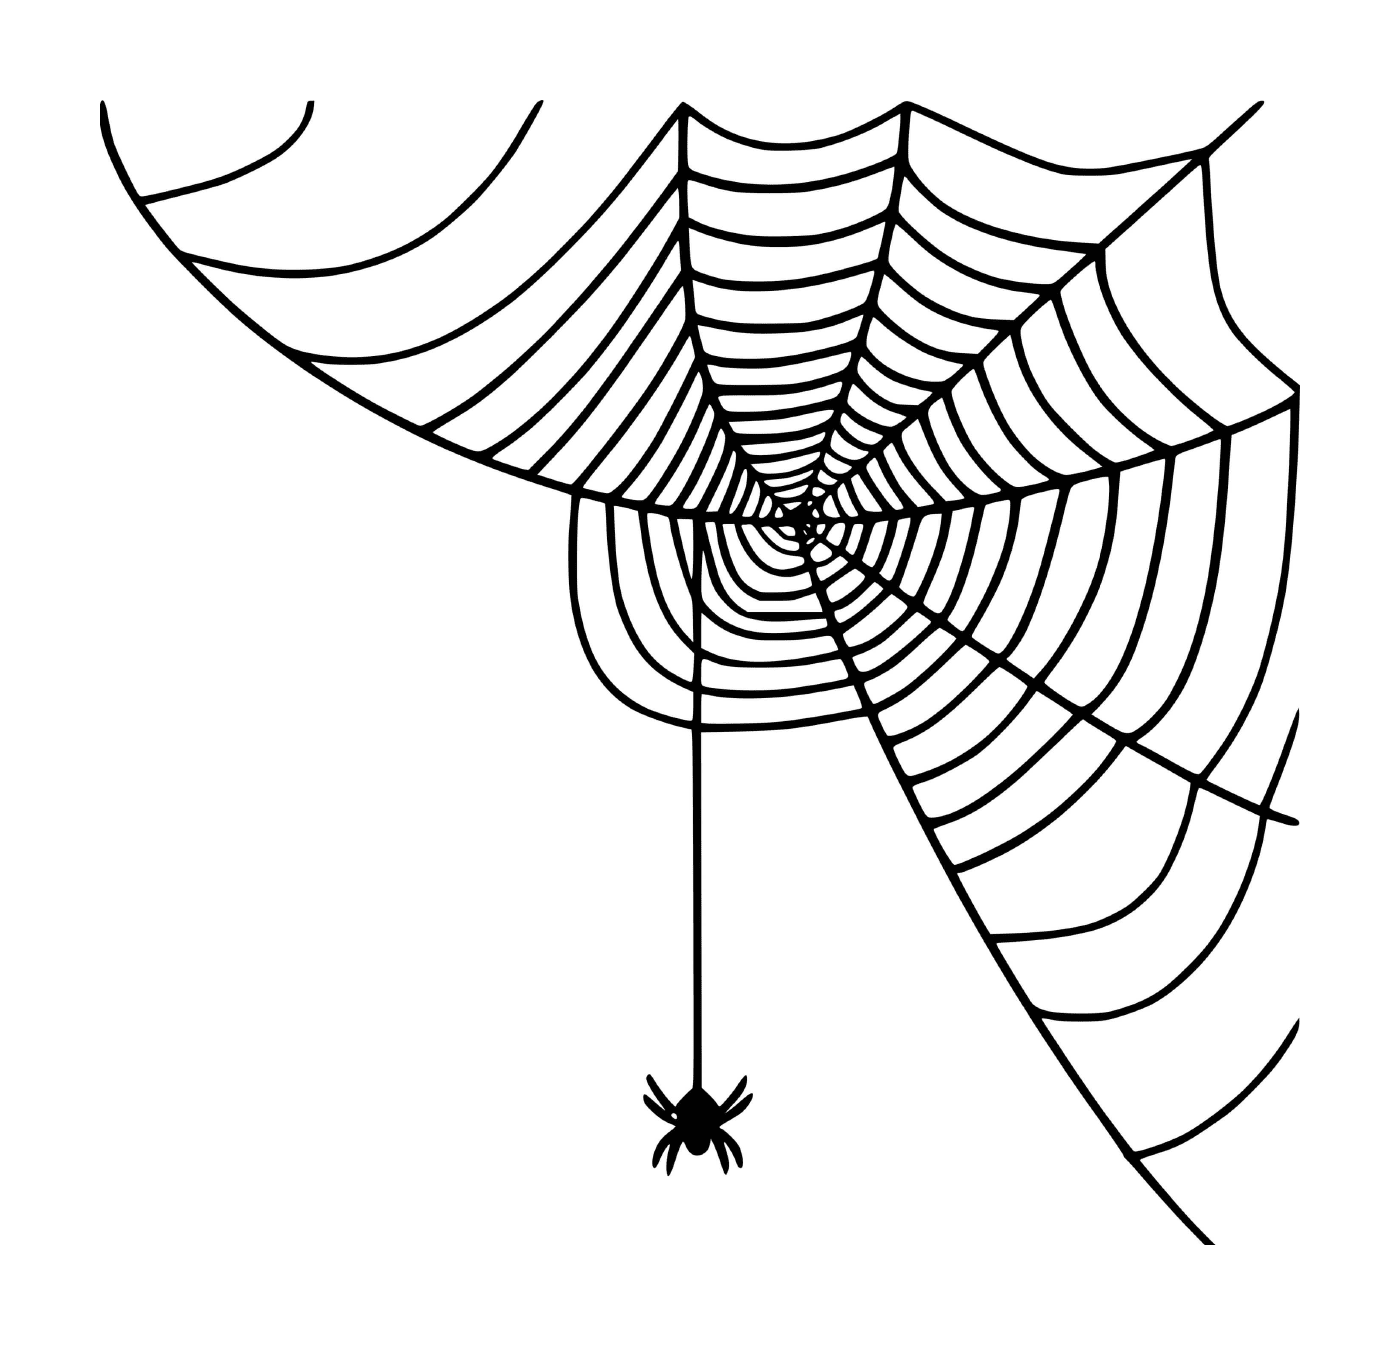  A small spider web woven by a spider 